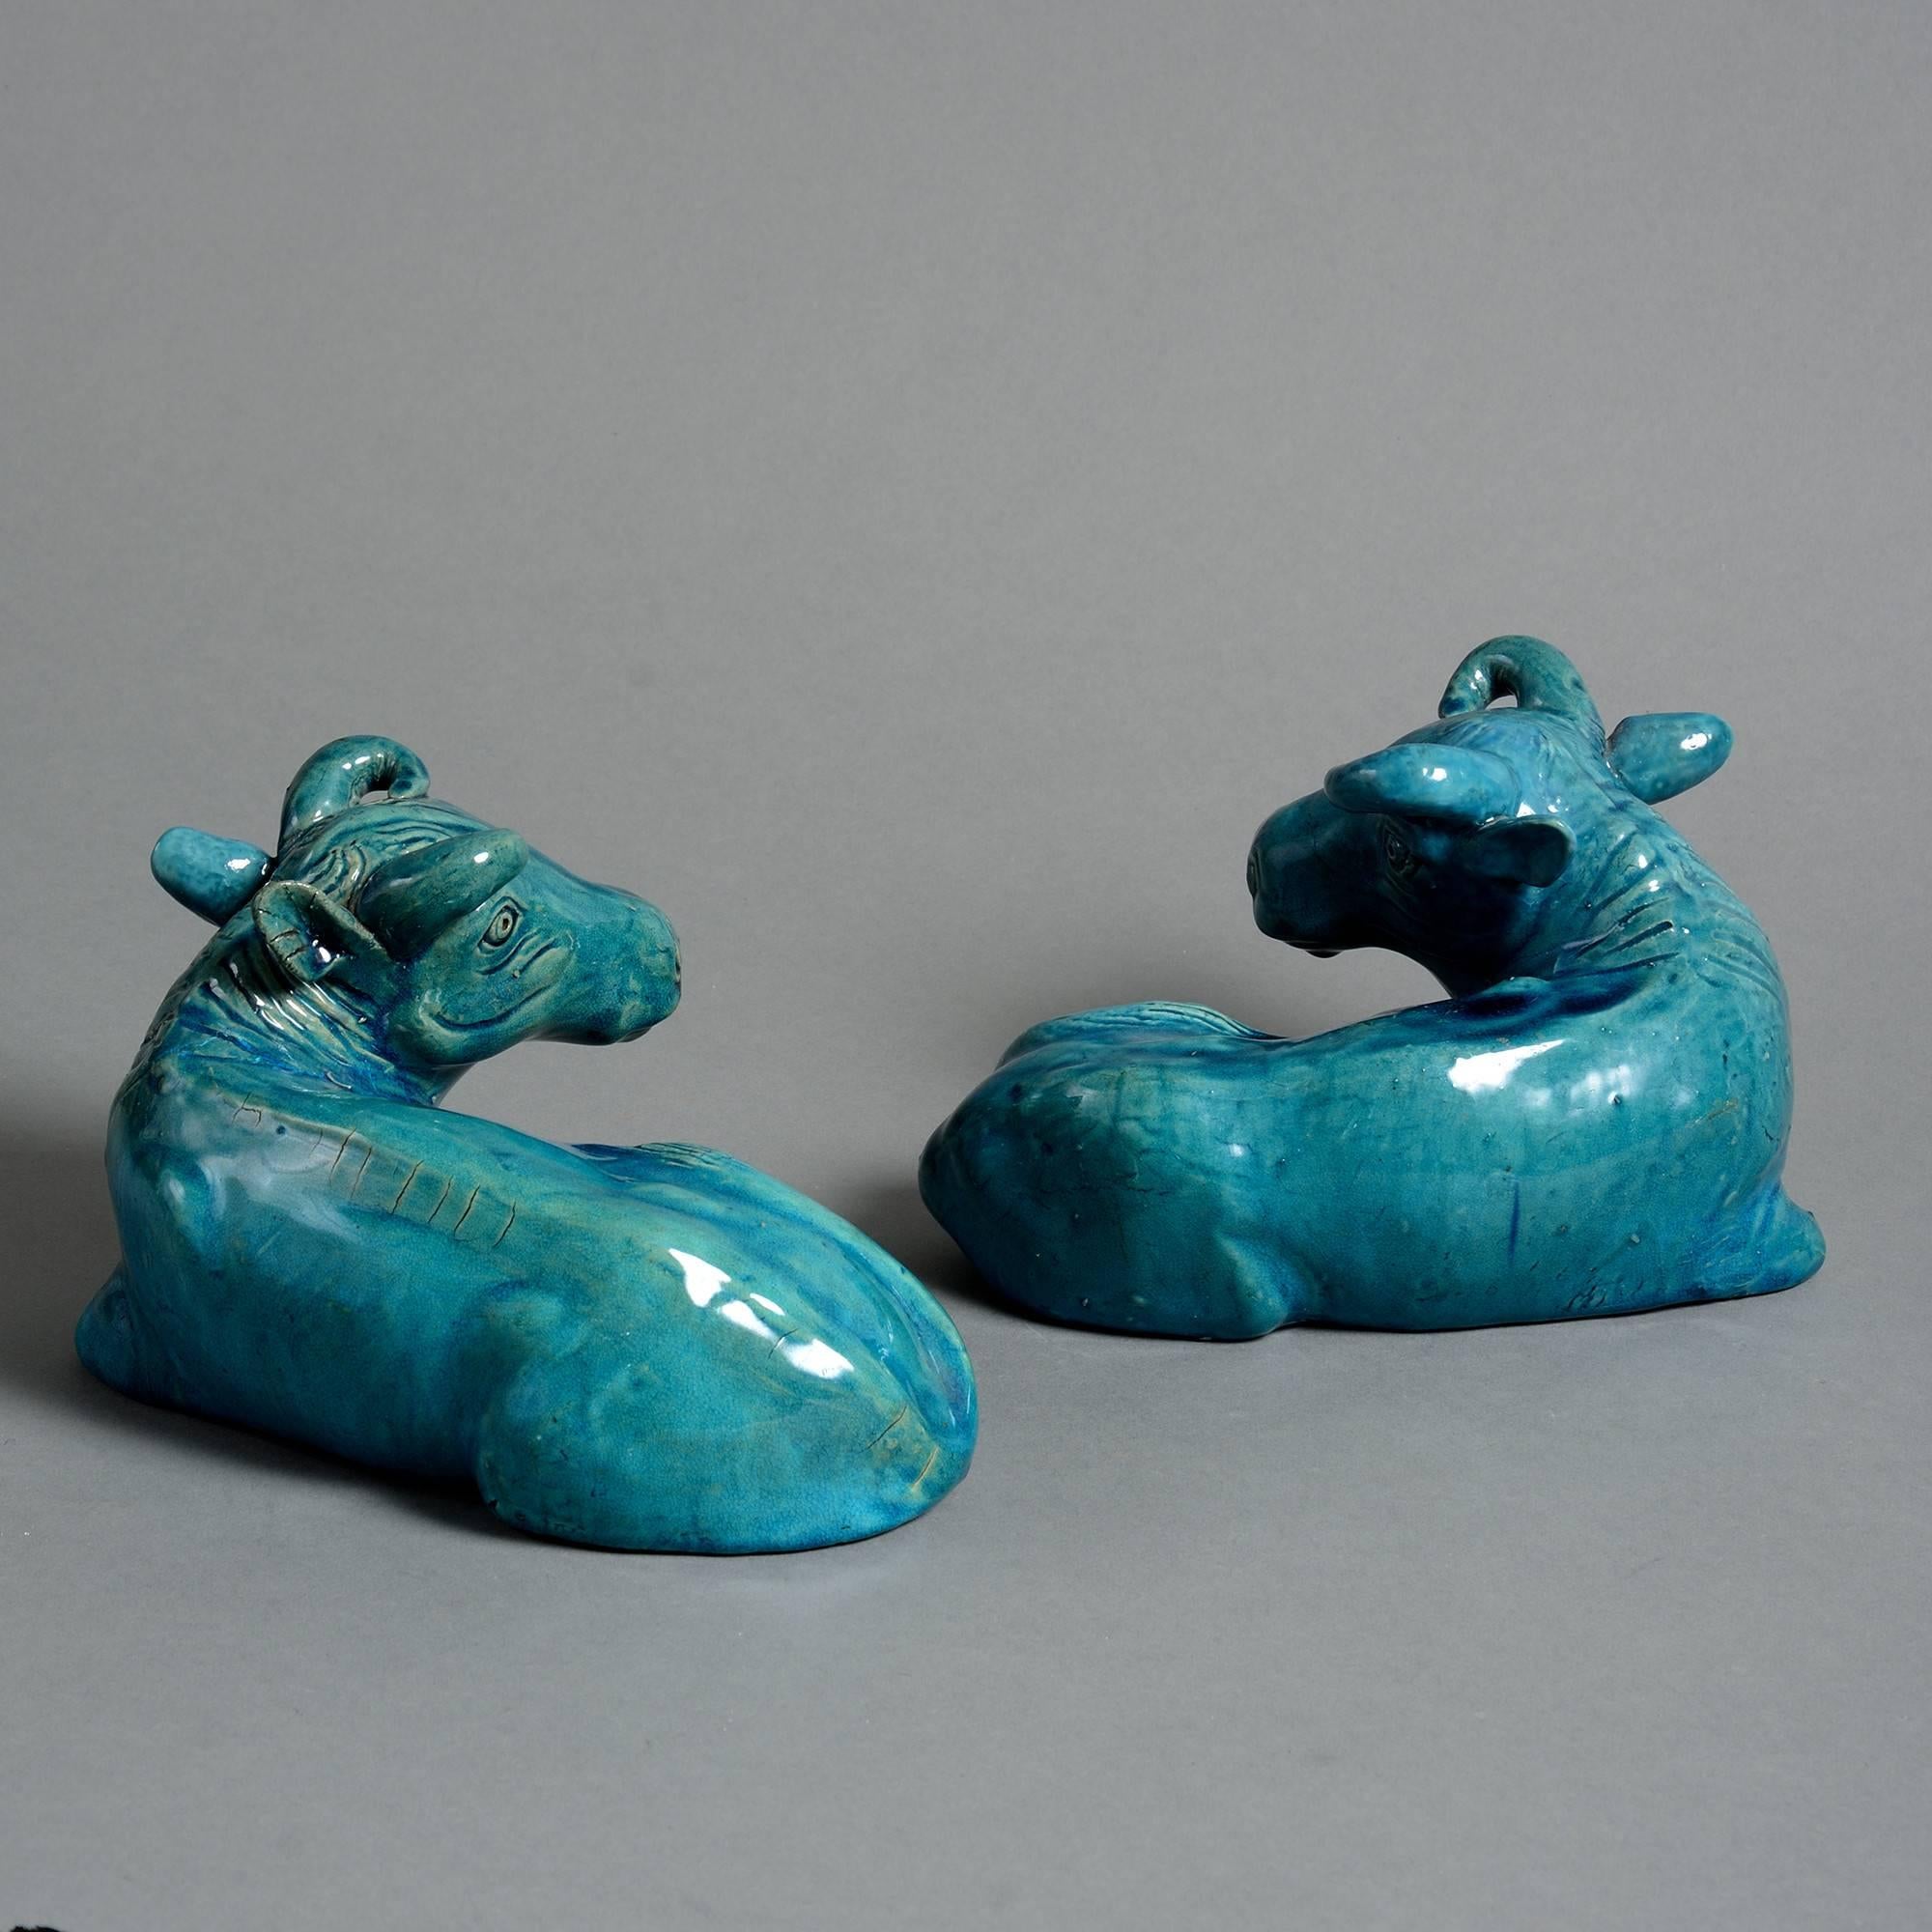 A pair of late 19th century turquoise glazed porcelain buffalo, of stylized form and modeled lying down,

Qing dynasty, Guangxu period (1875-1908).